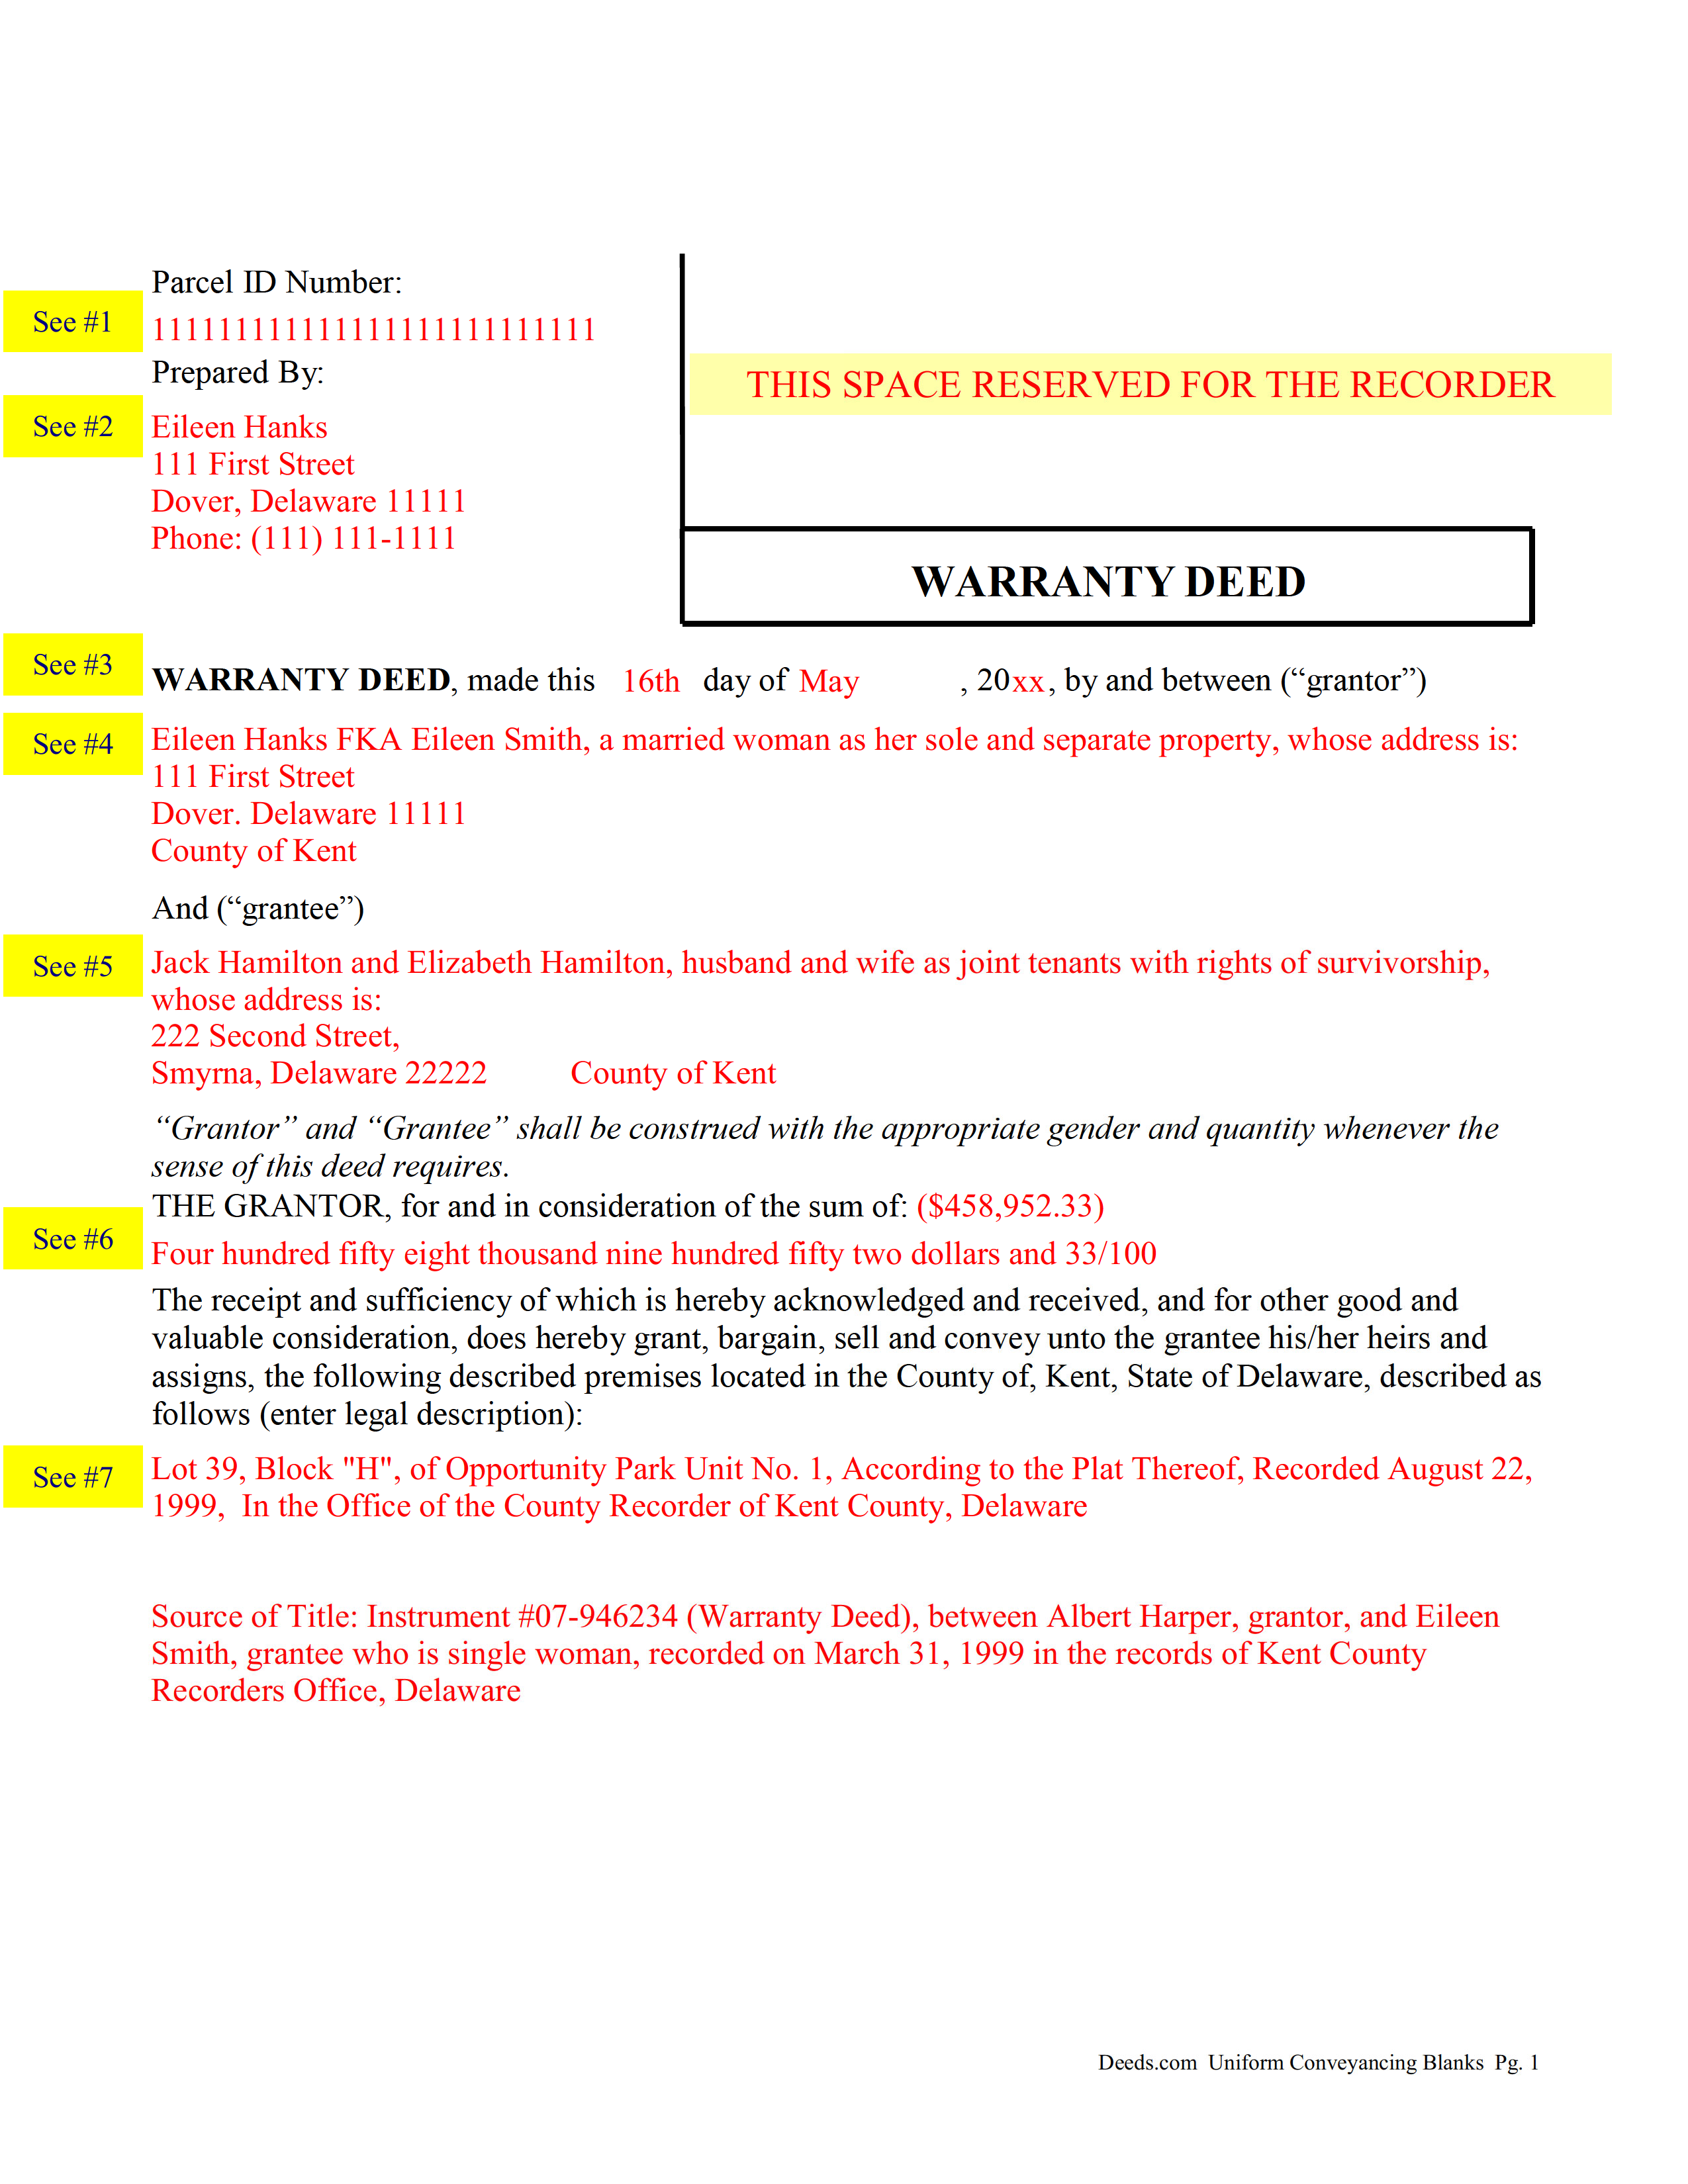 Completed Example of the Warranty Deed Document